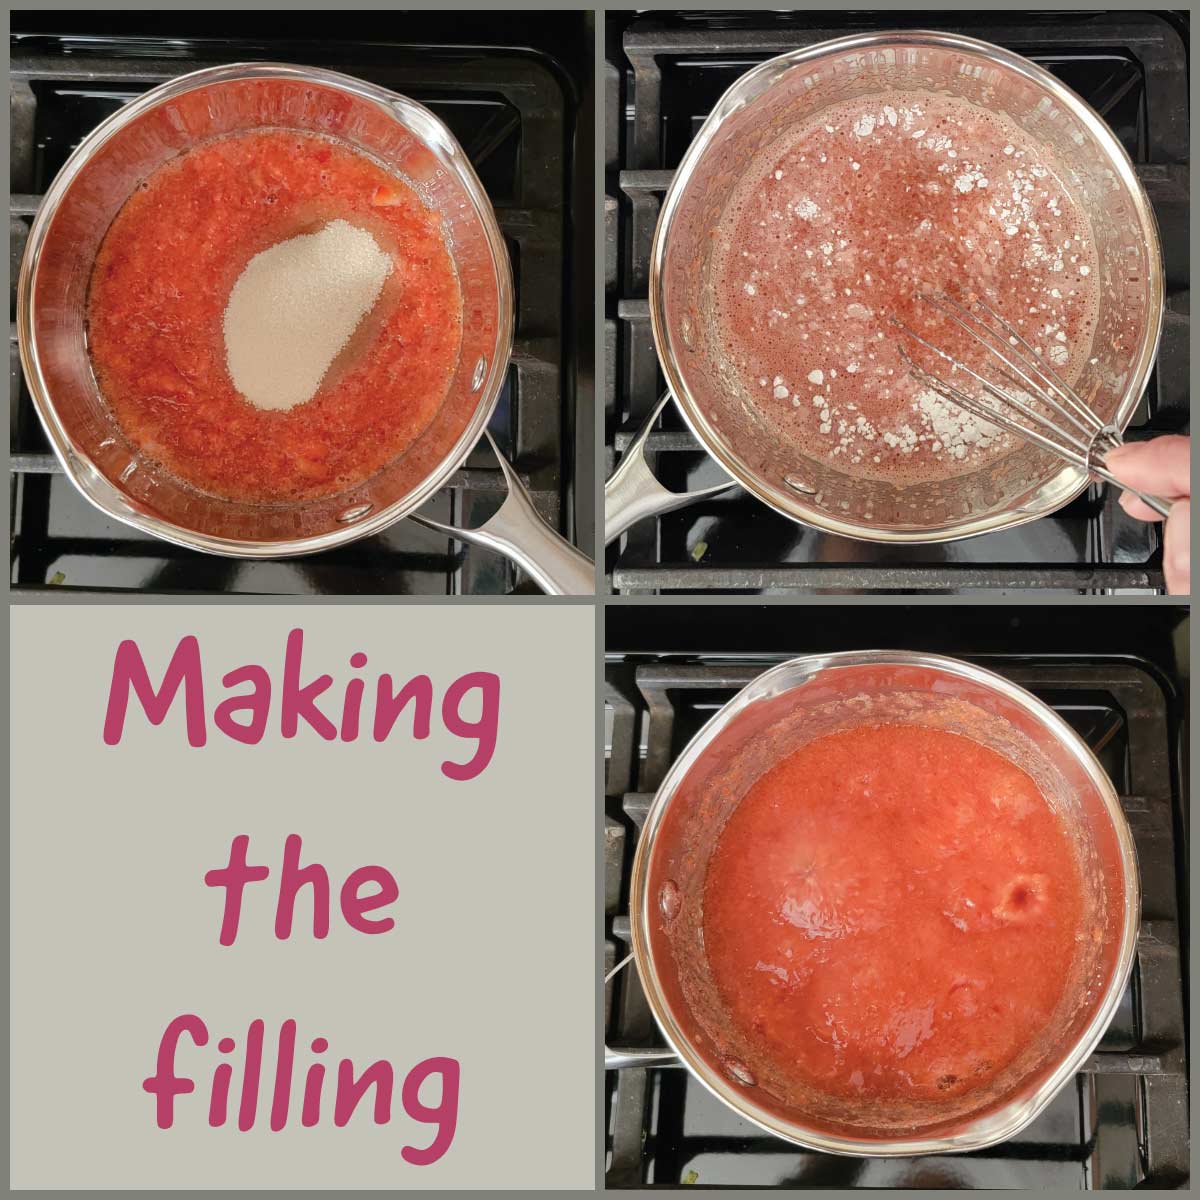 Making the strawberry filling steps - adding strawberries, water and sugar then adding the cornstarch.